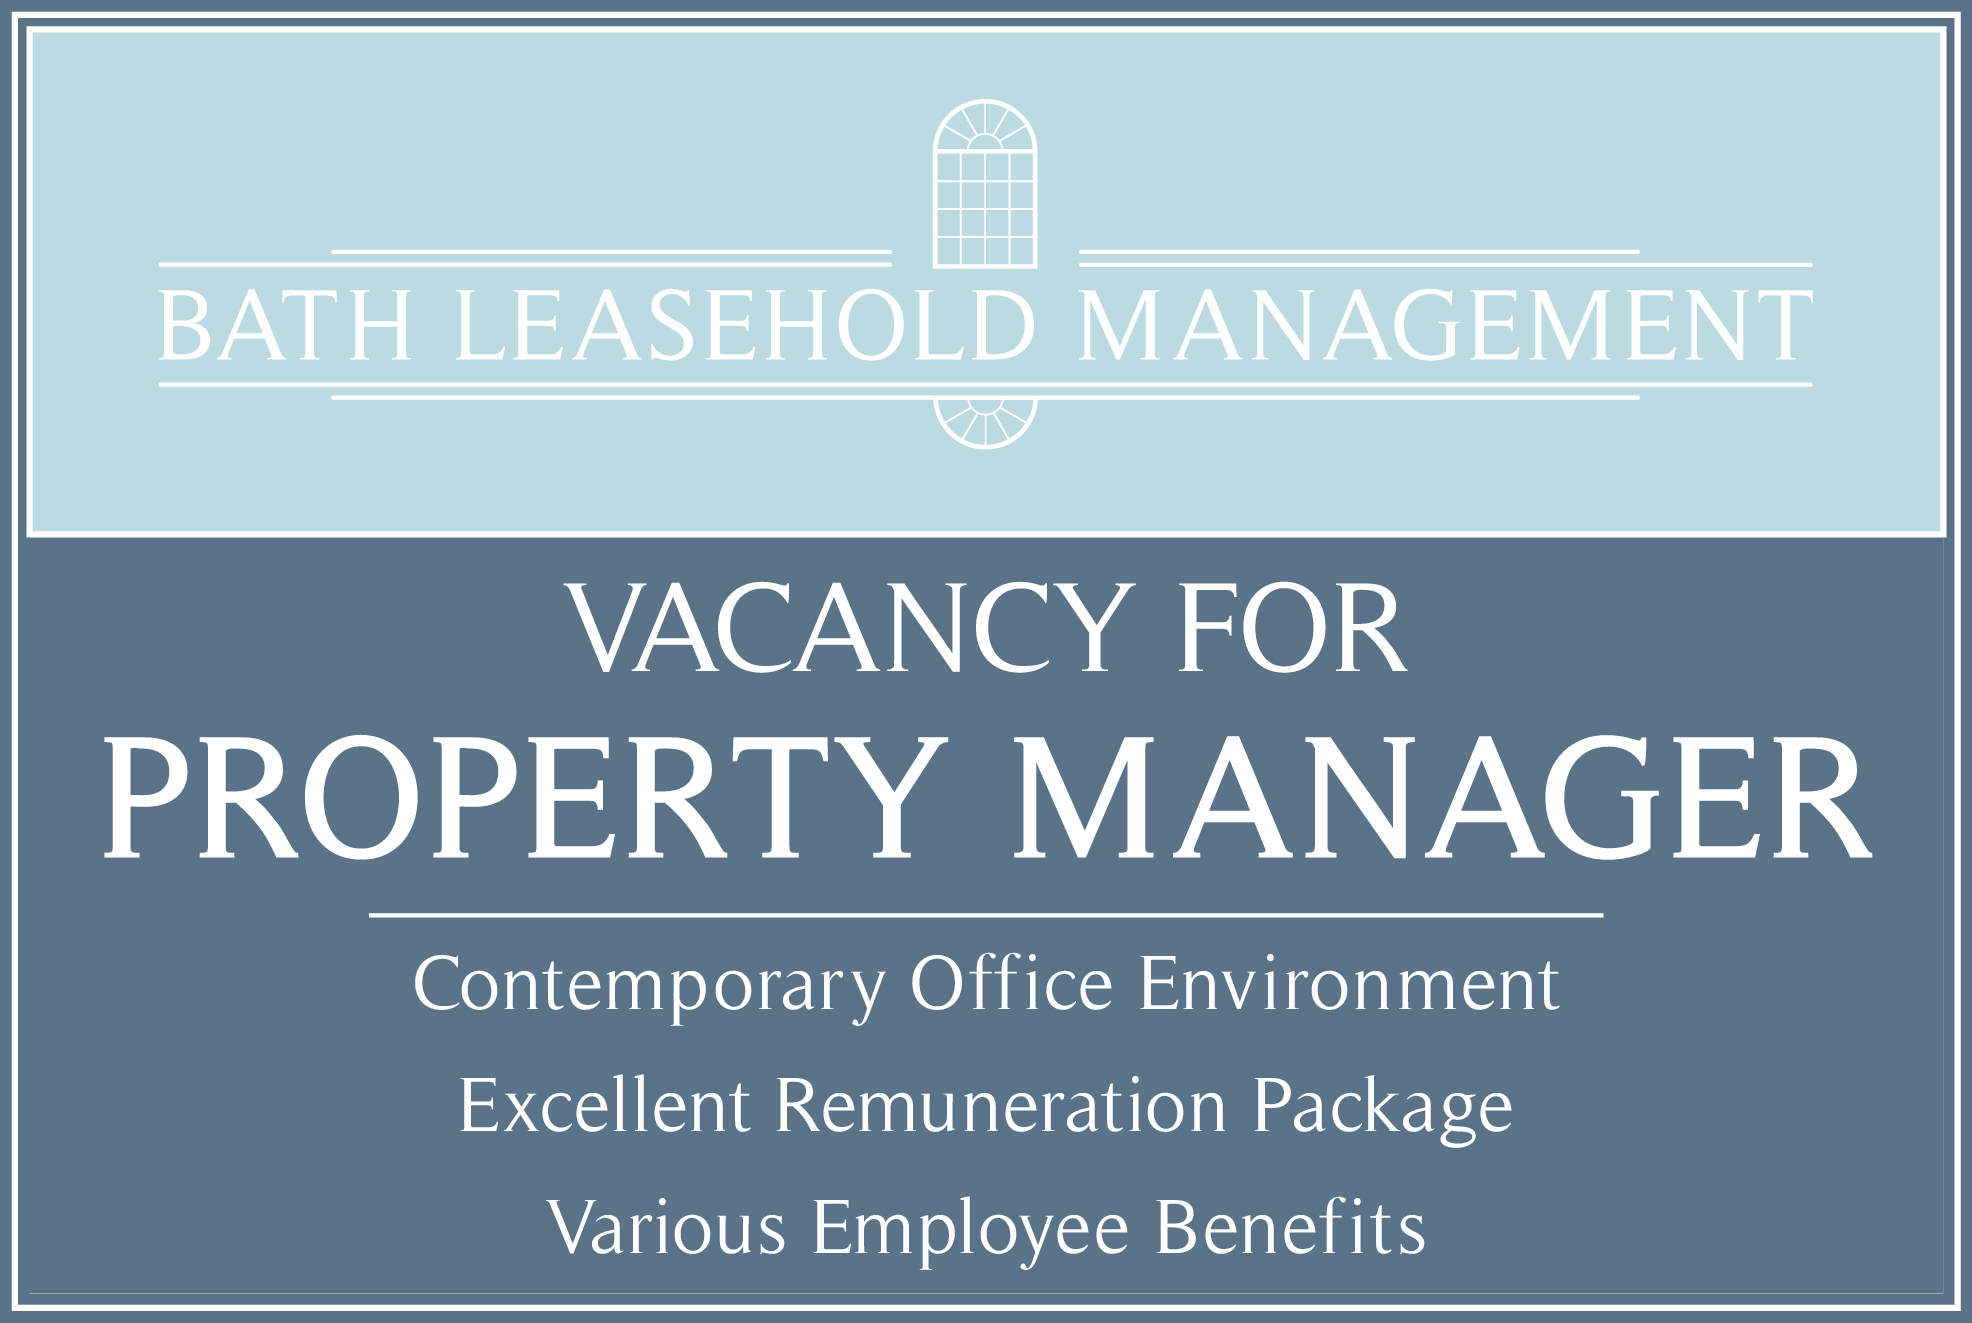 Bath Leasehold Management is looking to recruit a full-time Property Manager